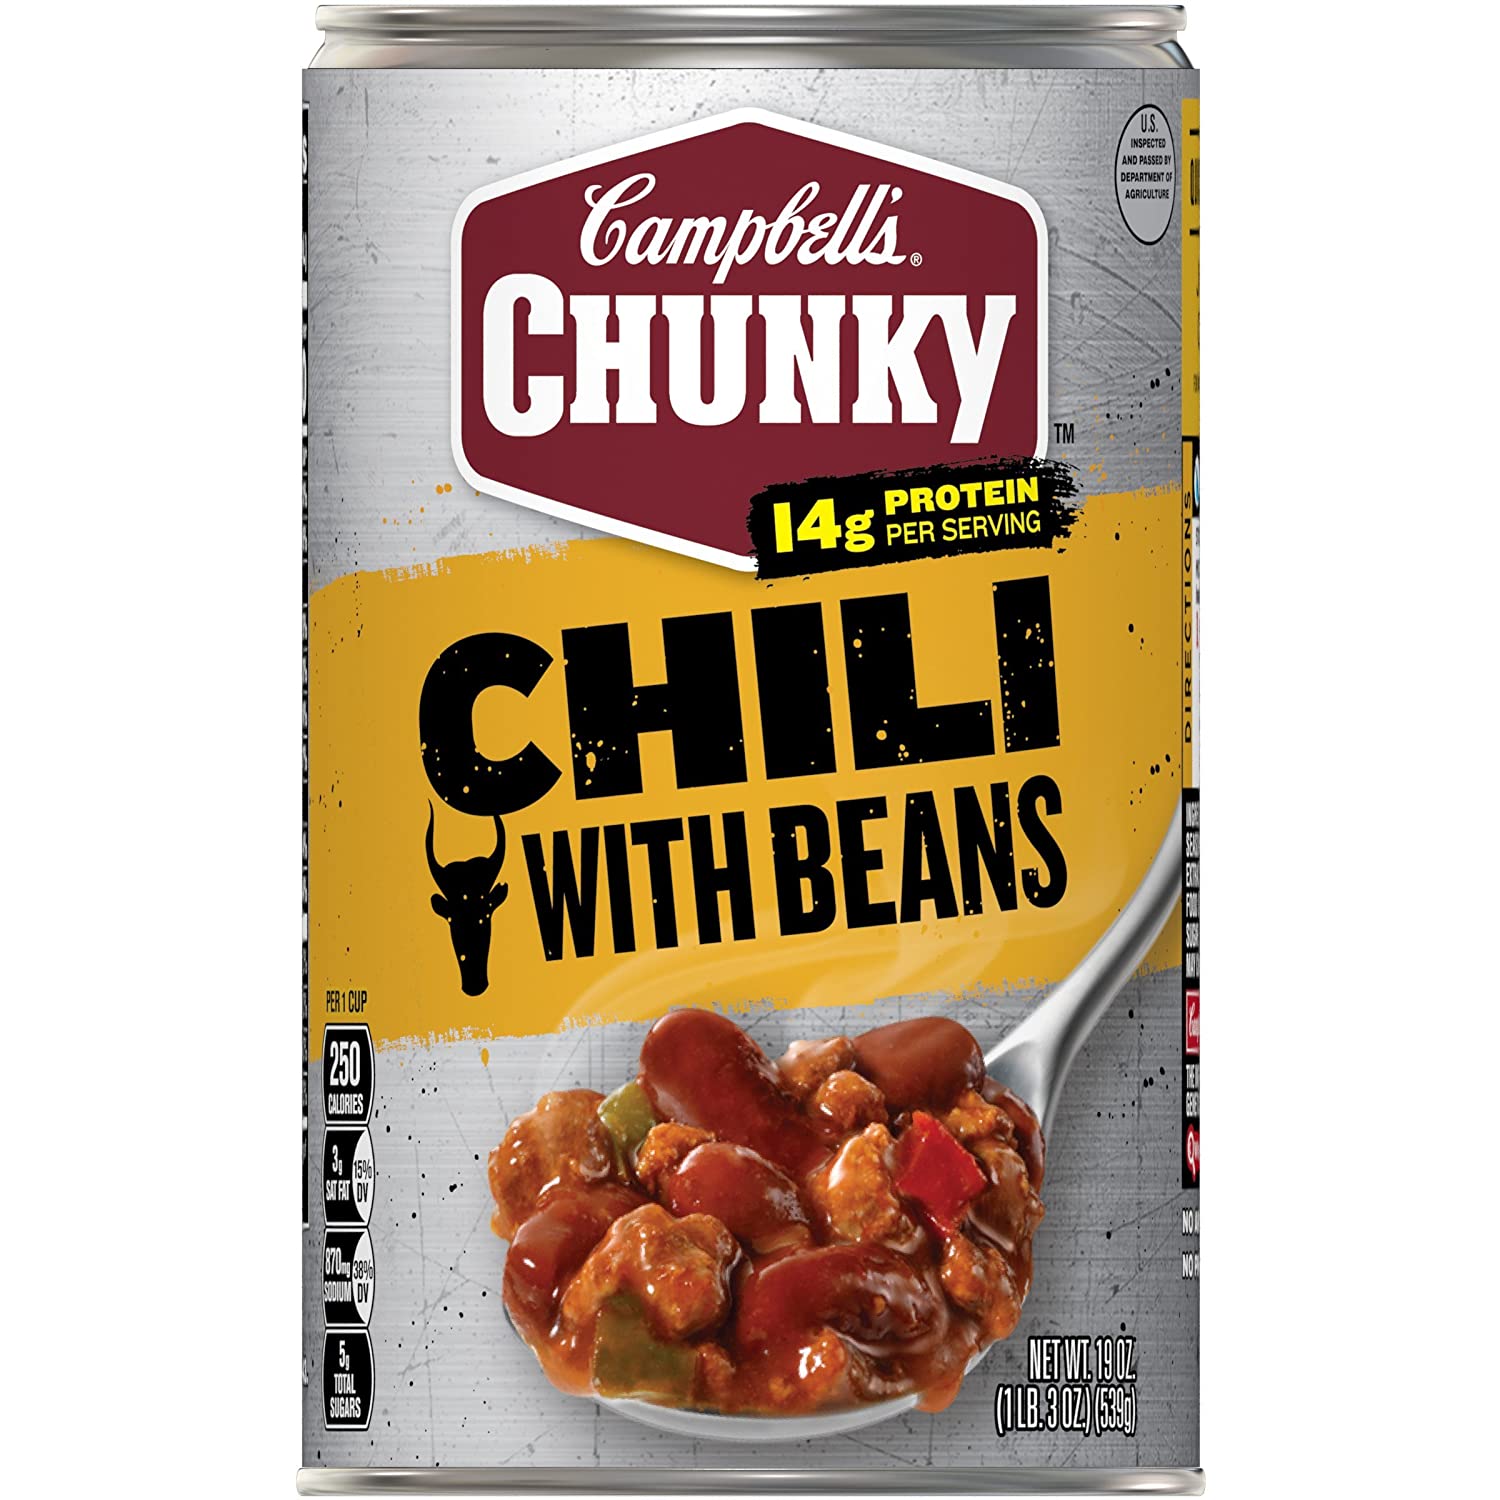 12-Pack 19oz Campbell's Chunky Chili with Beans $18.27